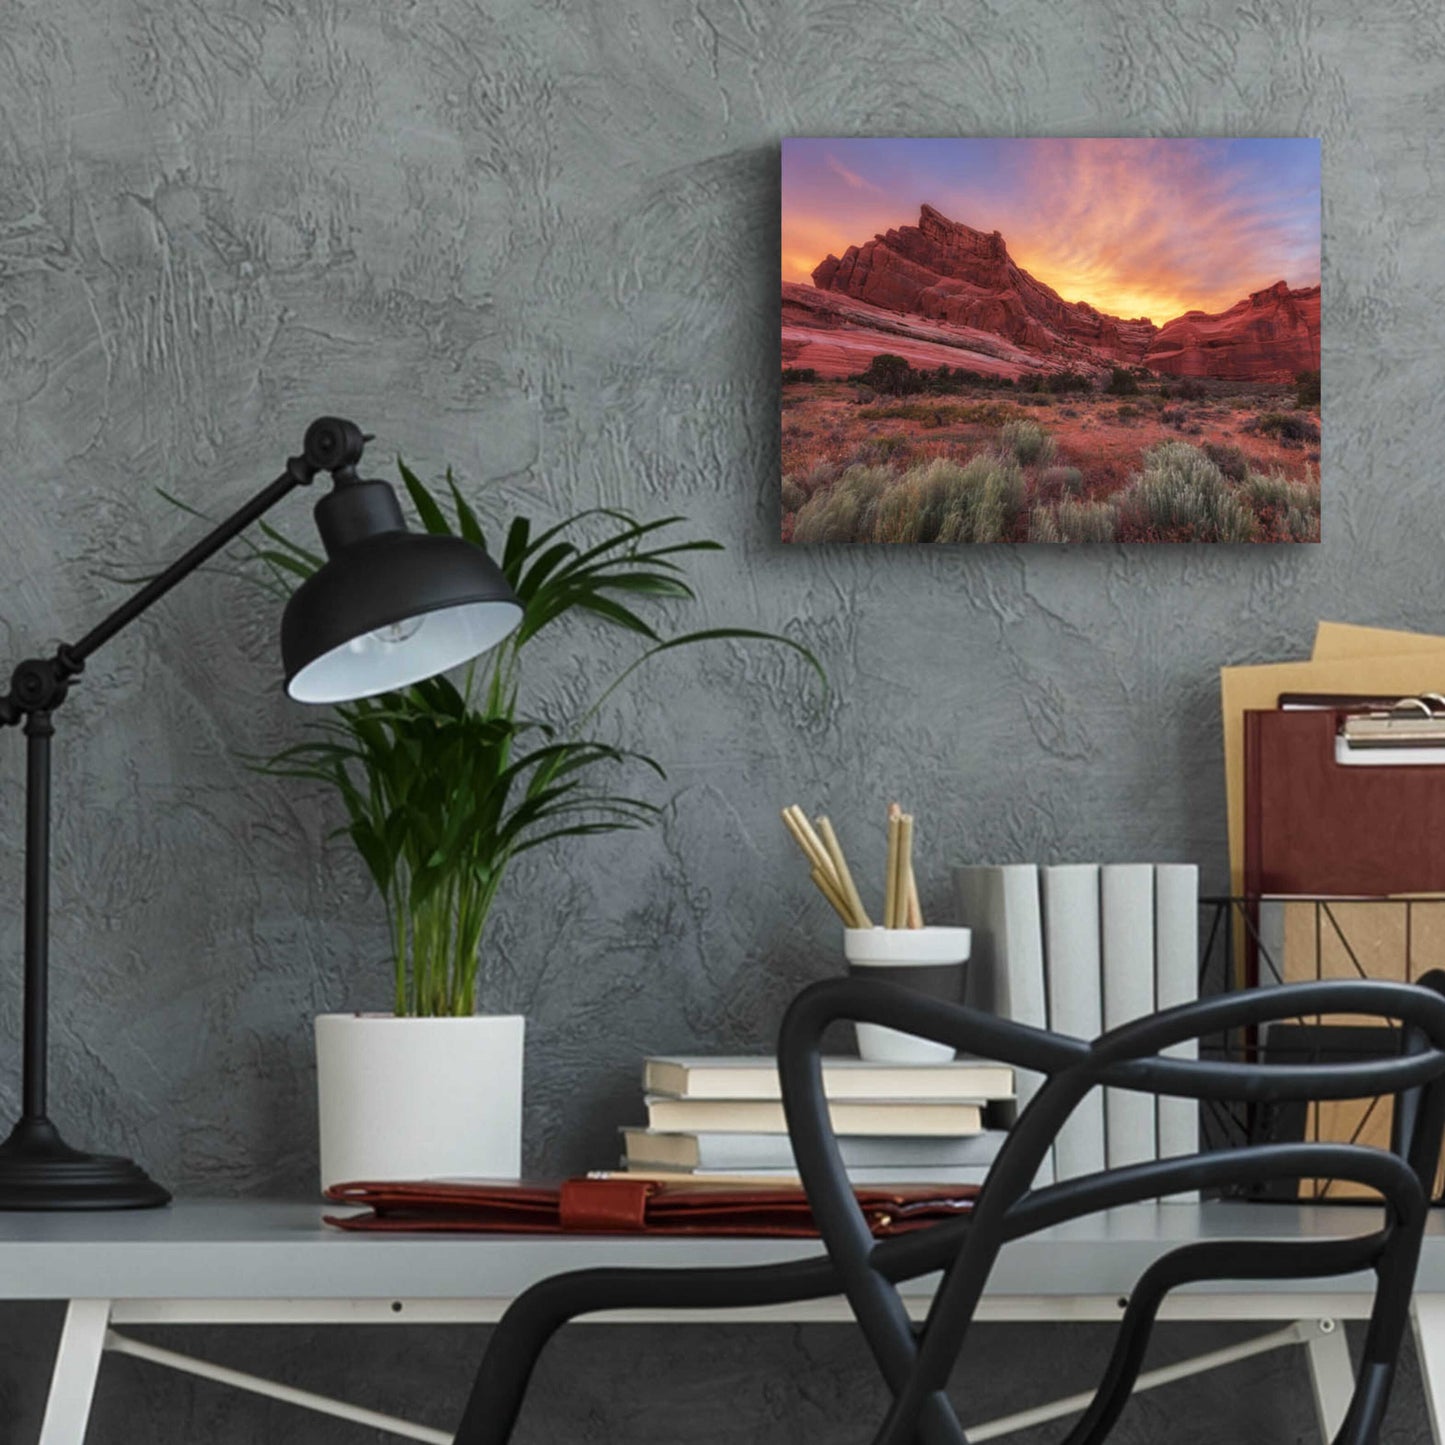 Epic Art 'Arches Sky Fire - Arches National Park' by Darren White, Acrylic Glass Wall Art,16x12